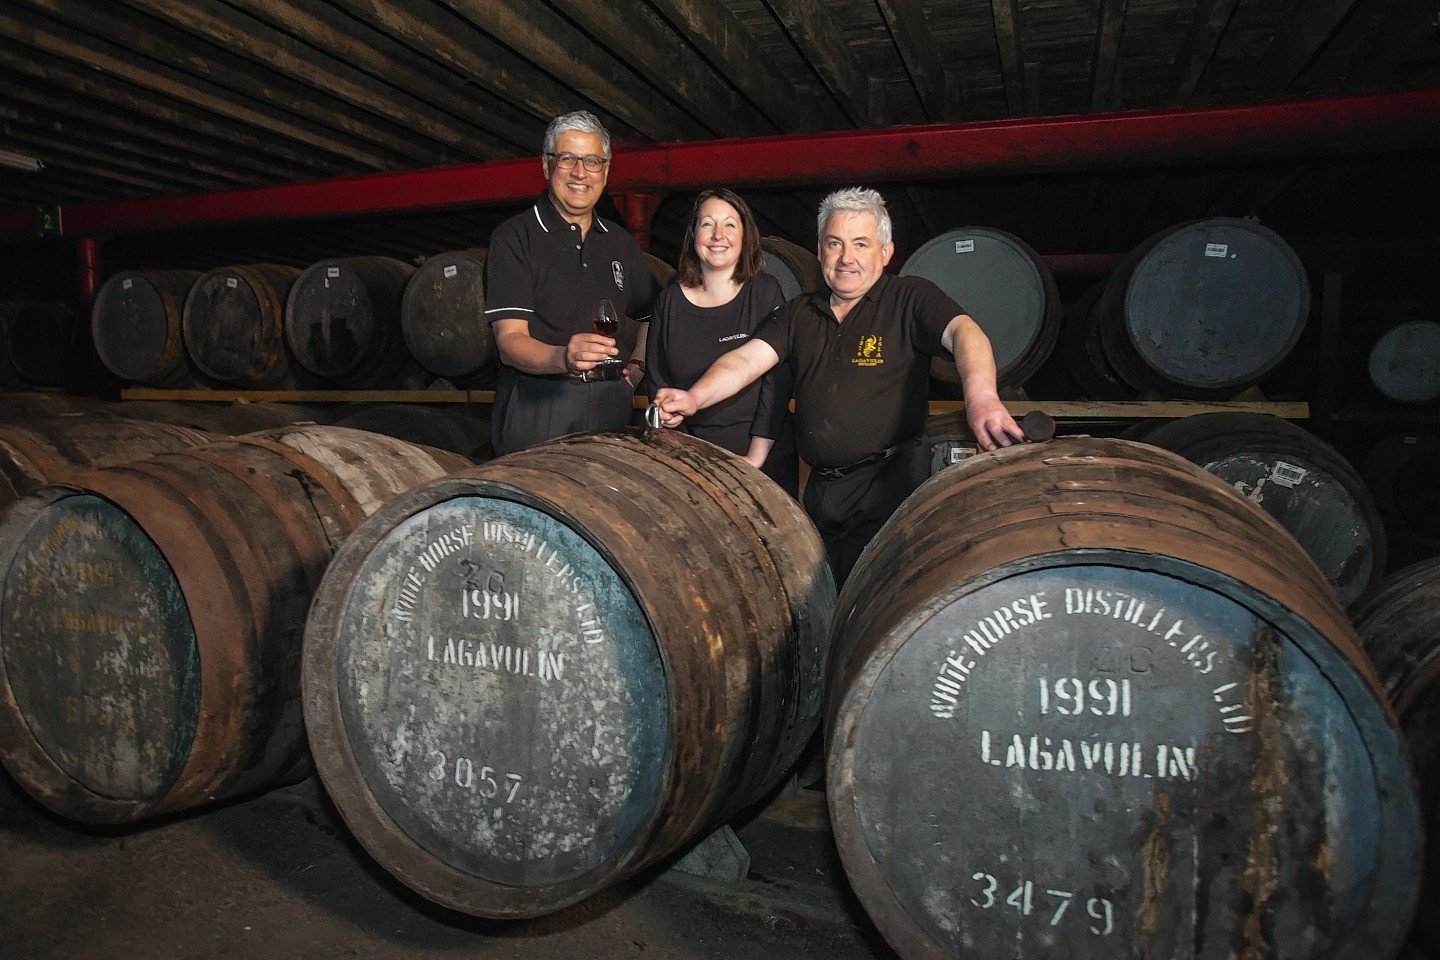 Diageo Chief Executive, Ivan Menezes and David Cutter, President of Global Supply & Procurement visit Islay to mark the 200th Anniversary of Lagavulin Distillery.